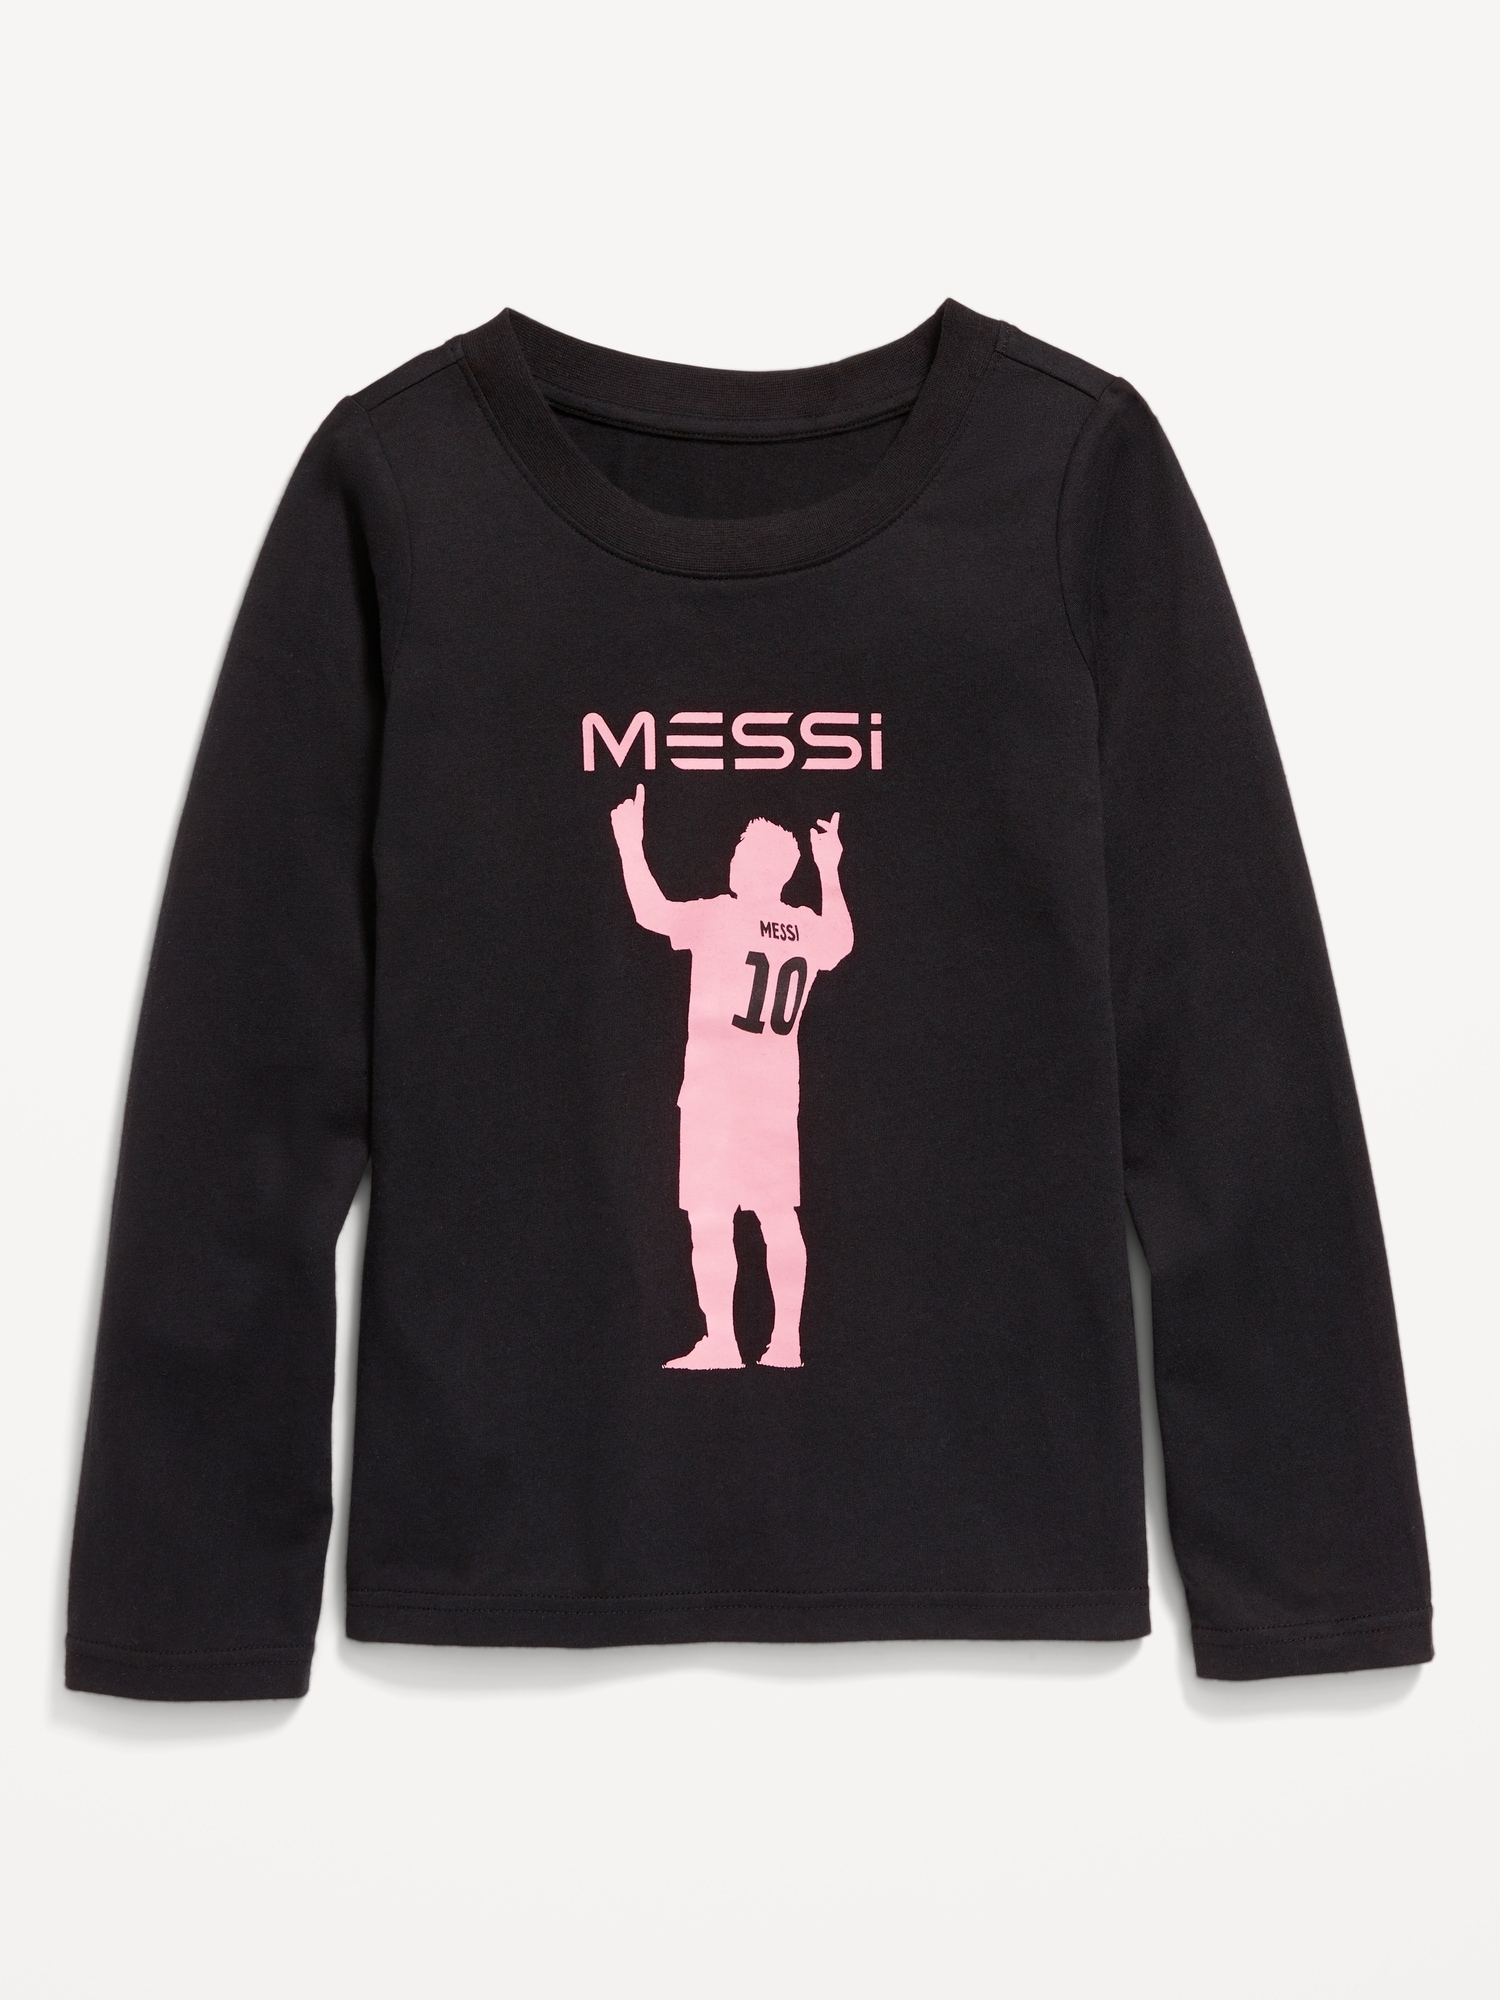 Messi™ Gender-Neutral Graphic T-Shirt for Kids